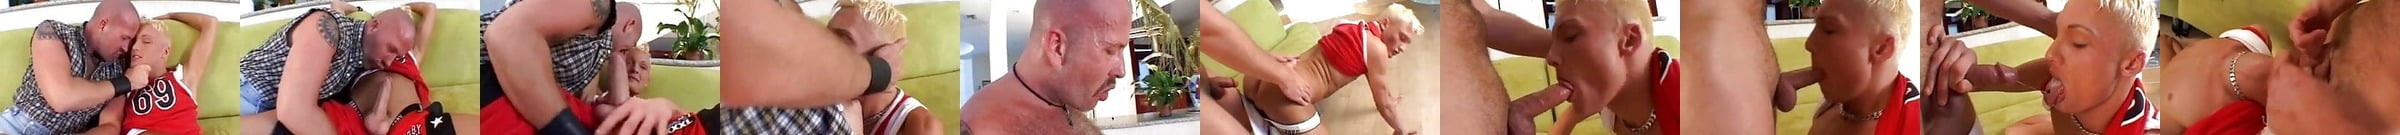 Asian Twink Gives Double Blowjob Gay Porn 84 Xhamster Xhamster